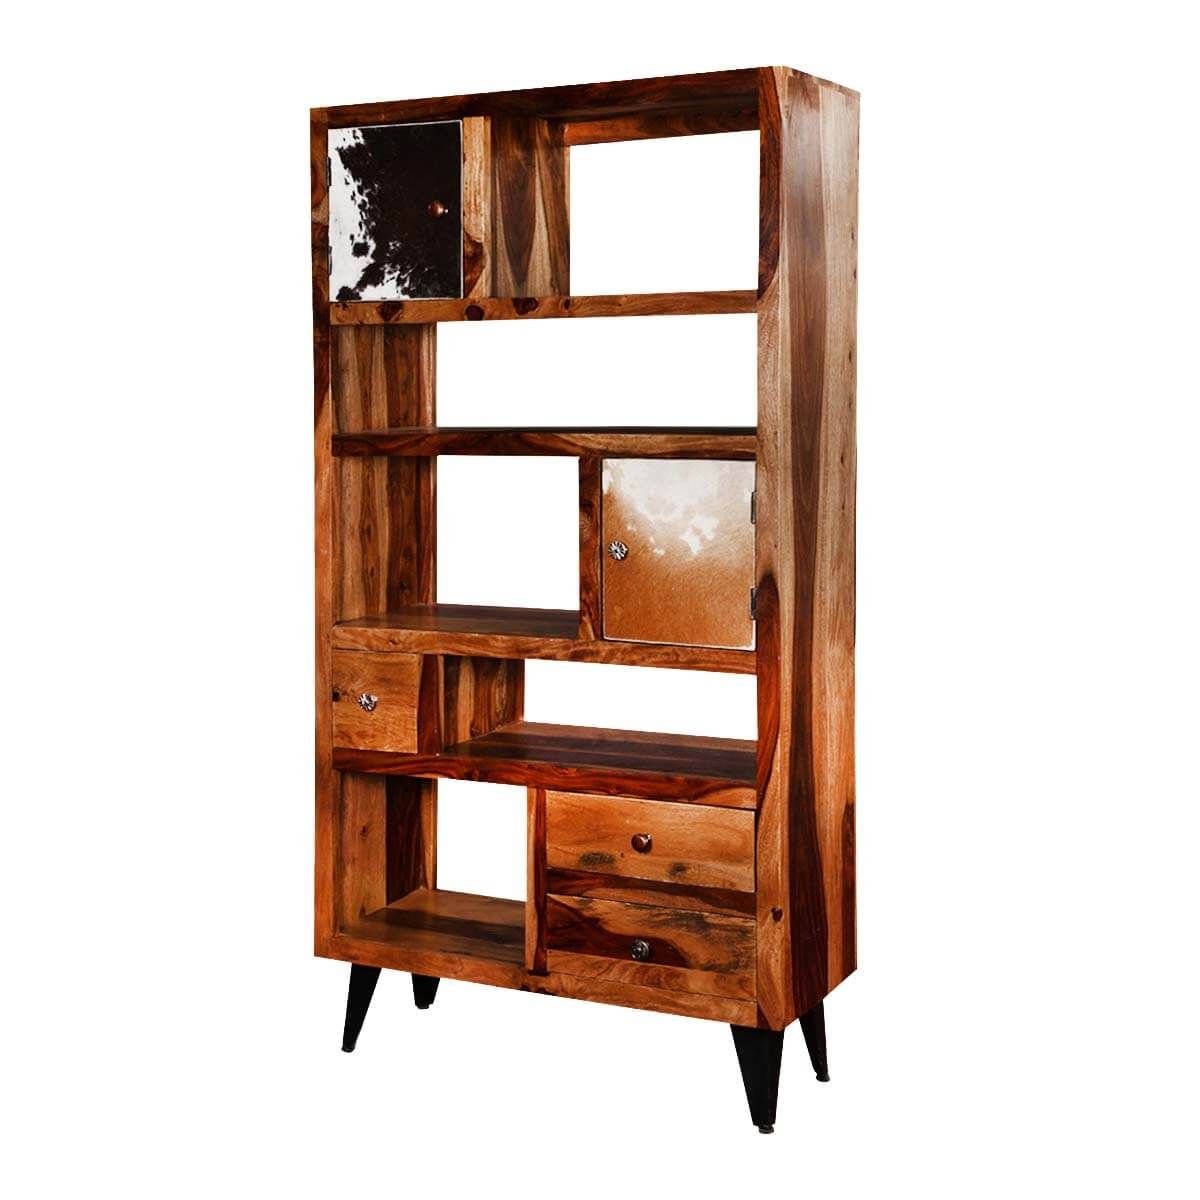 California 68" Asymmetrical Bookcase Storage Rack With Drawers Intended For 68 Inch Bookcases (View 15 of 15)